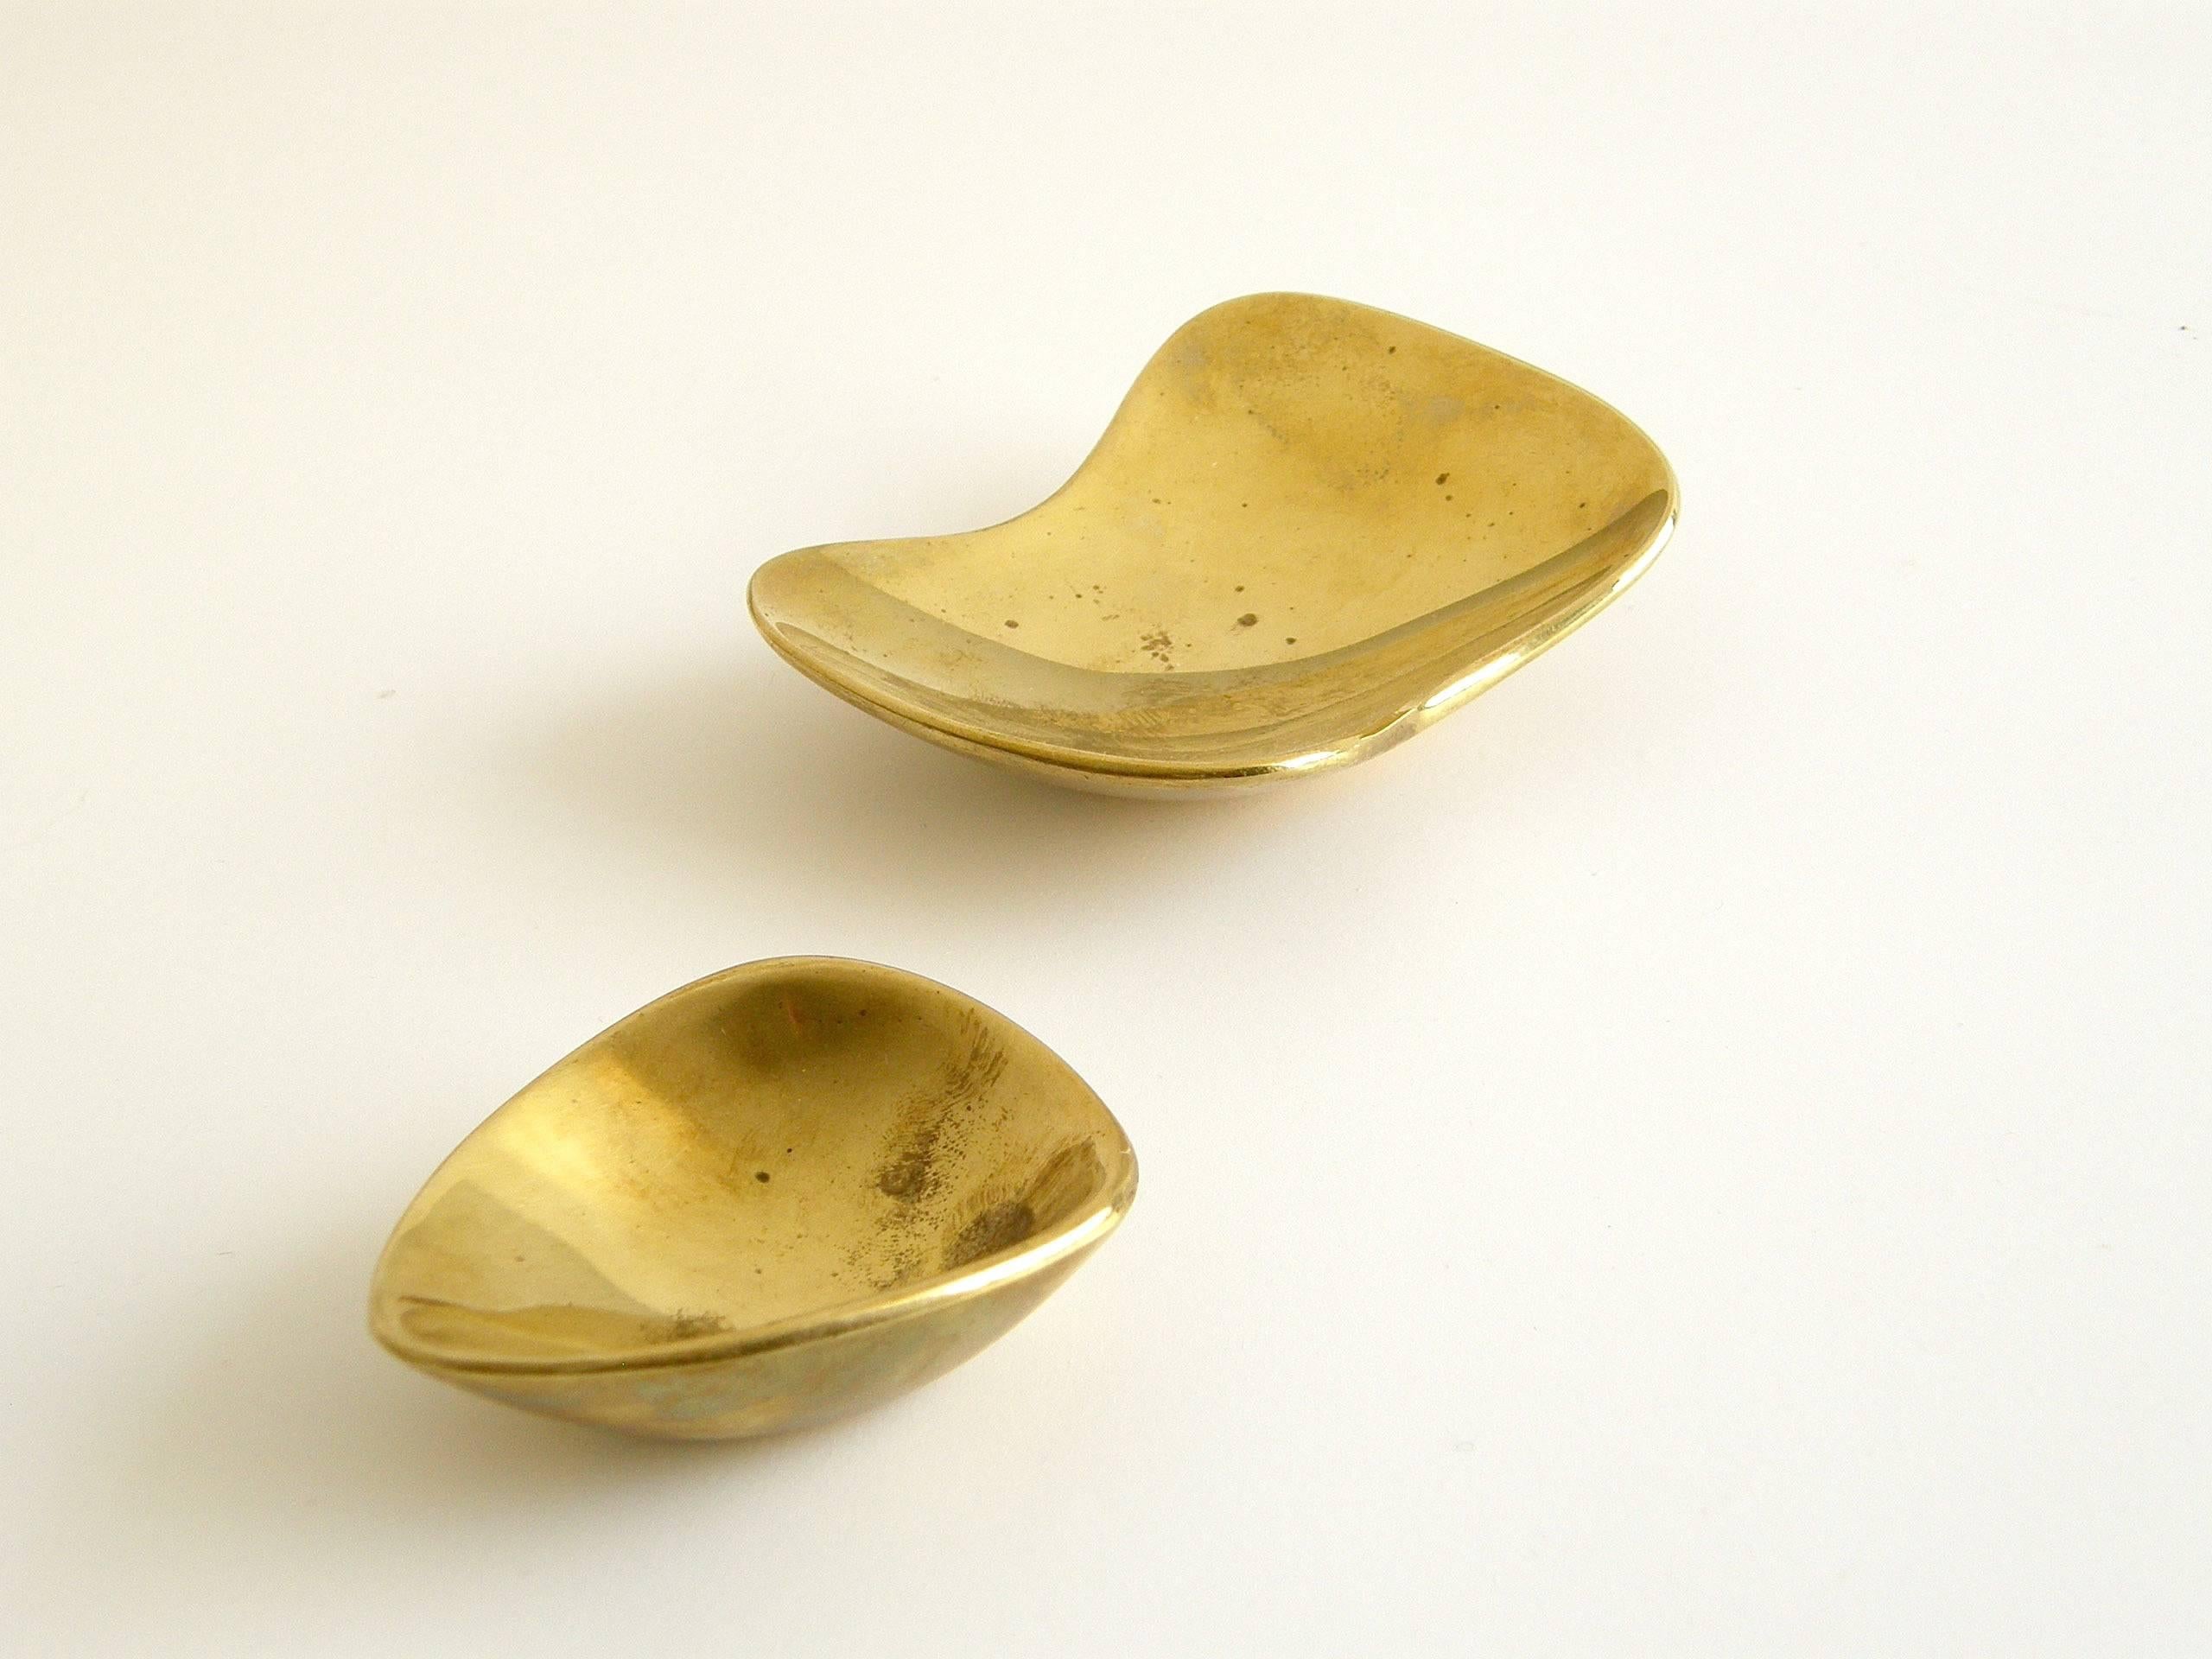 Two miniature brass bowls or ashtrays by Carl Auböck. Their asymmetry and softly curving edges give them a playful and tactile quality. They are both unsigned, but one of them has remnants of a paper label from a retailer in Innsbruck.

smaller- 2